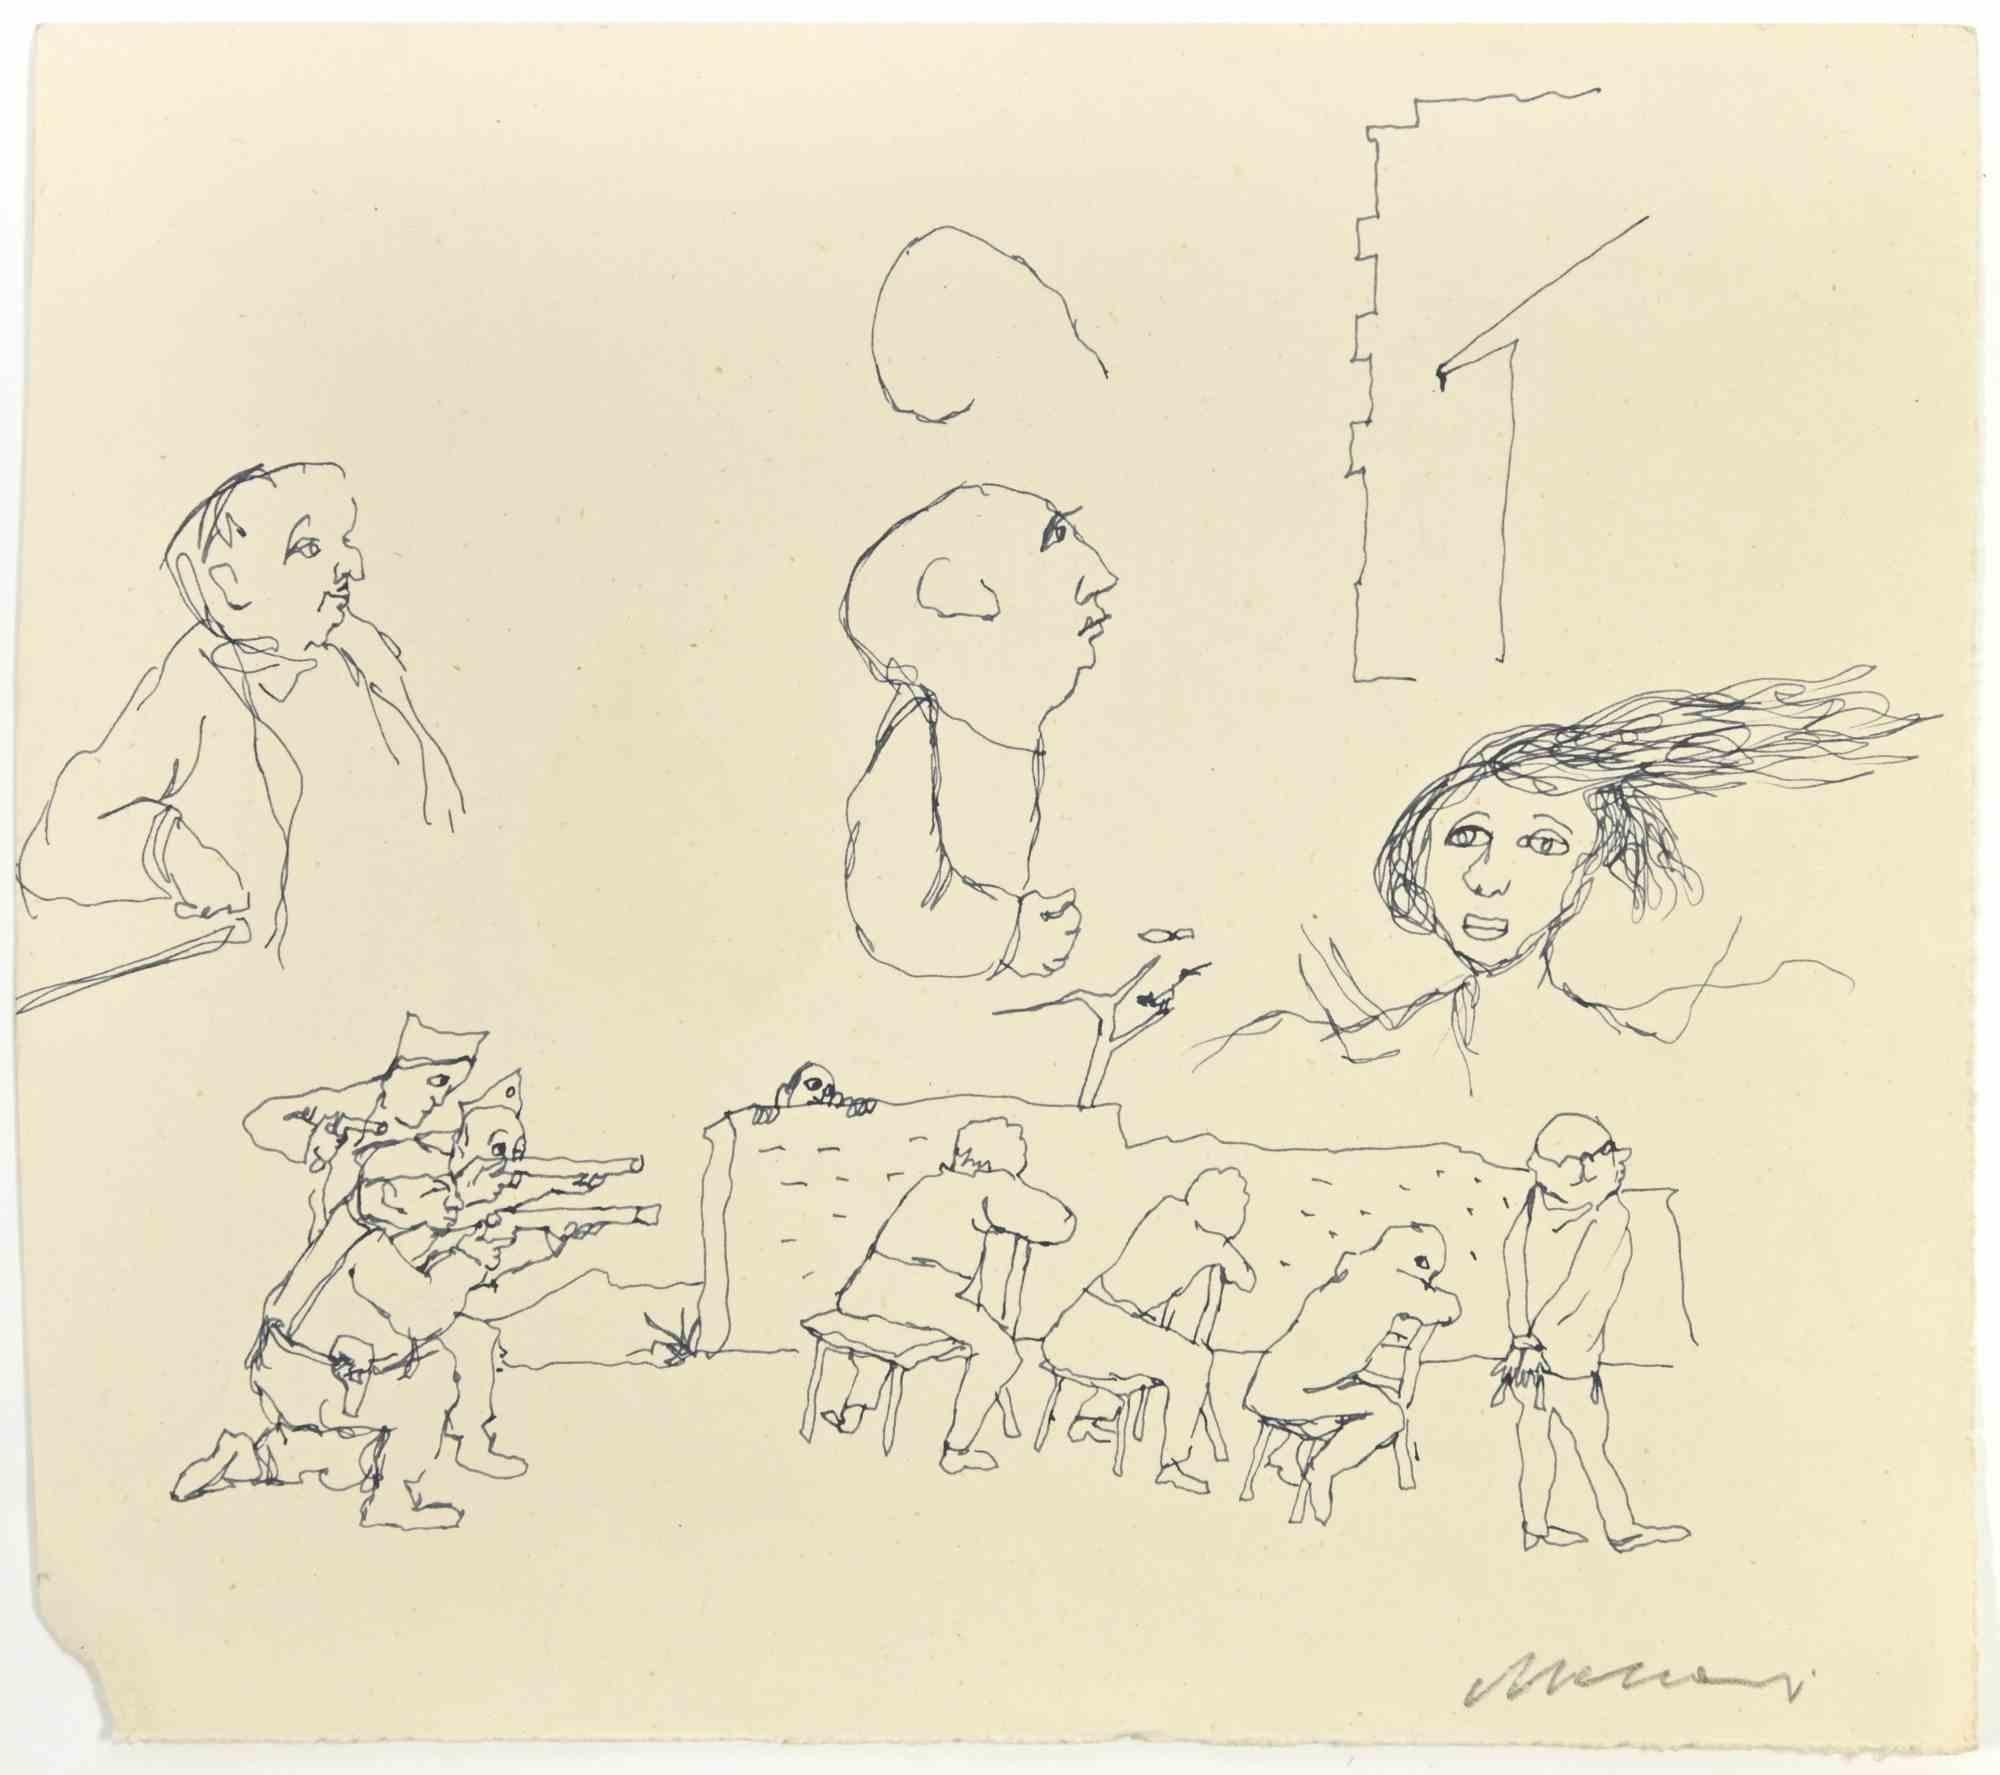 Shooting is a pen Drawing realized by Mino Maccari  (1924-1989) in the 1960s.

Hand-signed on the lower.

Good conditions with a small missing piece on the lower left margin.

Mino Maccari (Siena, 1924-Rome, June 16, 1989) was an Italian writer,